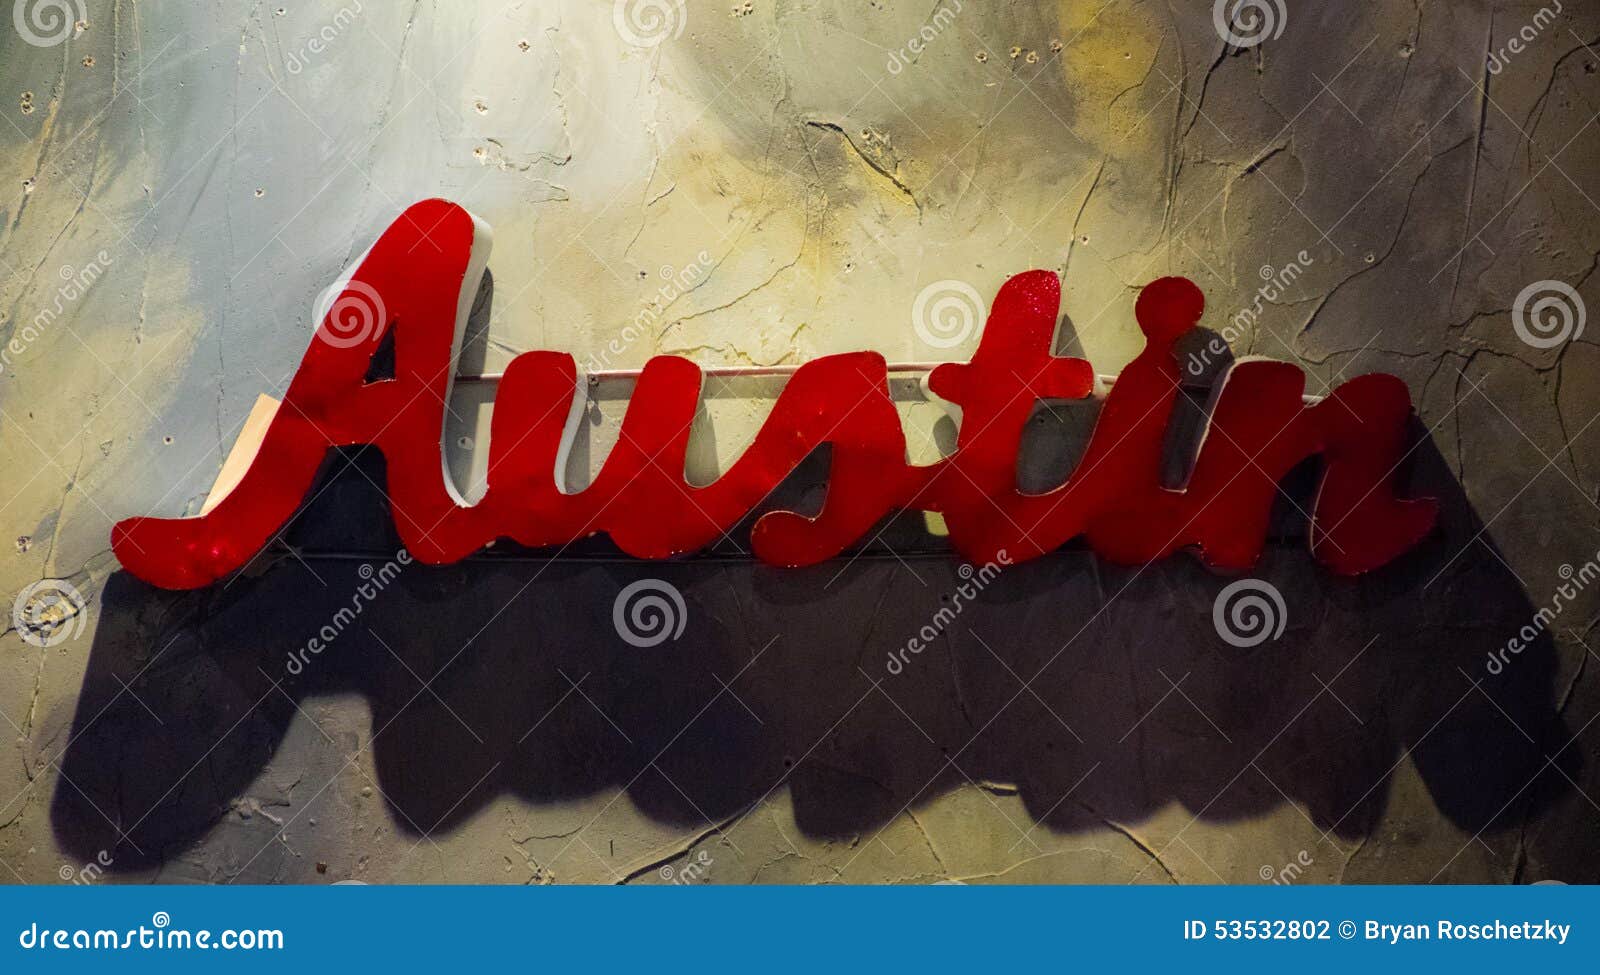 austin texas metal sign hanging on textured wall